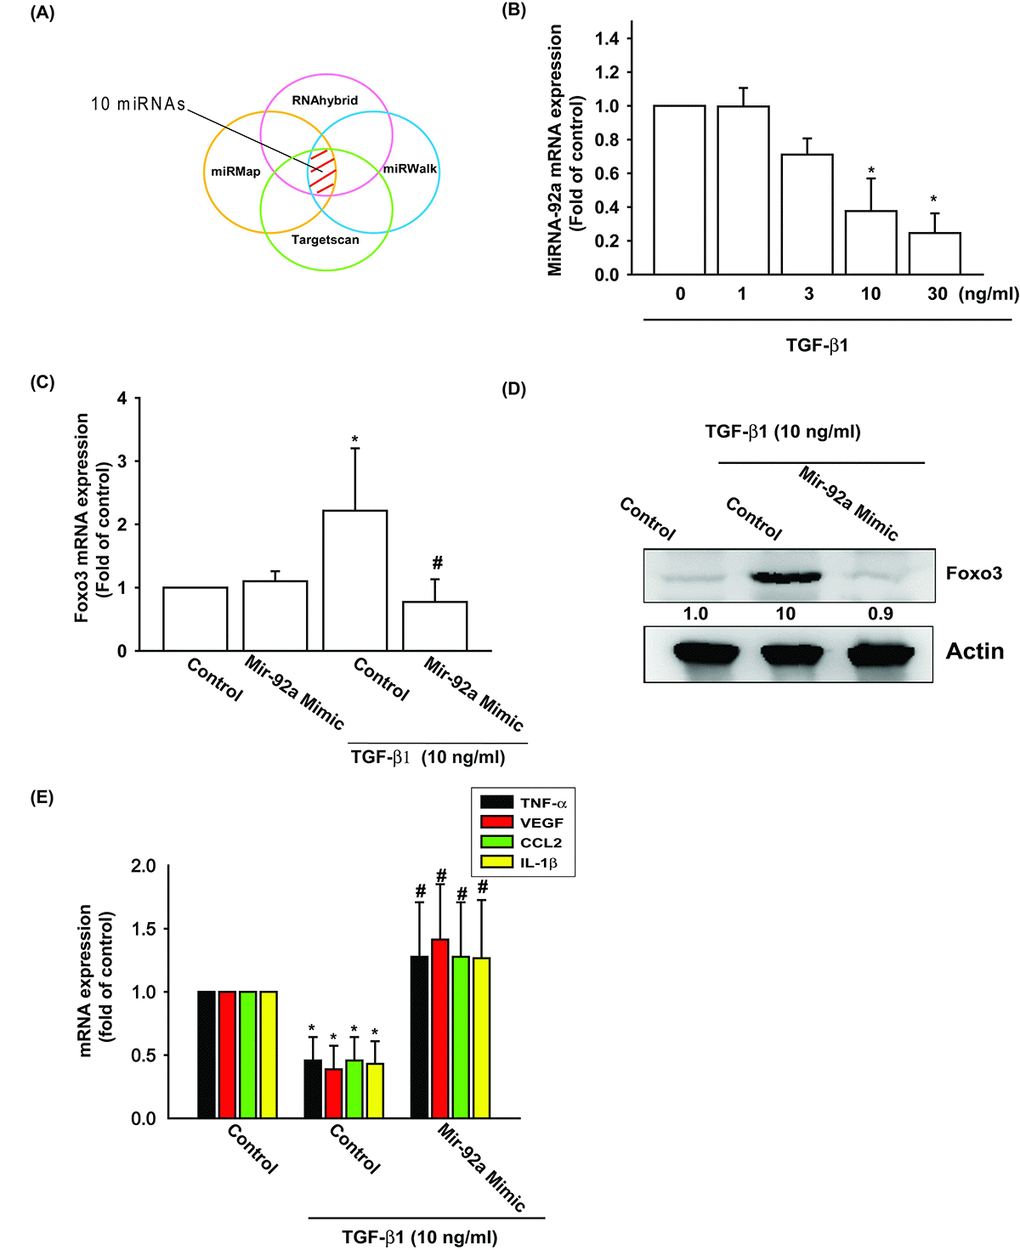 TGF-β1 suppression of miR-92a enhances FOXO3 production. (A) Open-source software (TargetScan, miRDB, and miRWalk) was used to identify which miRNAs could possibly interfere with FOXO3 transcription. (B) OASFs were incubated with TGF-β1 at concentrations of 0, 1, 3, 10, and 30 ng/ml. miR-92a expression levels were examined by qPCR assay. (C-E) OASFs were transfected with miR-92a mimic and then stimulated with TGF-β1. The mRNA and protein levels were examined by qPCR and Western blot. Results are expressed as the mean ± SEM. *p p 